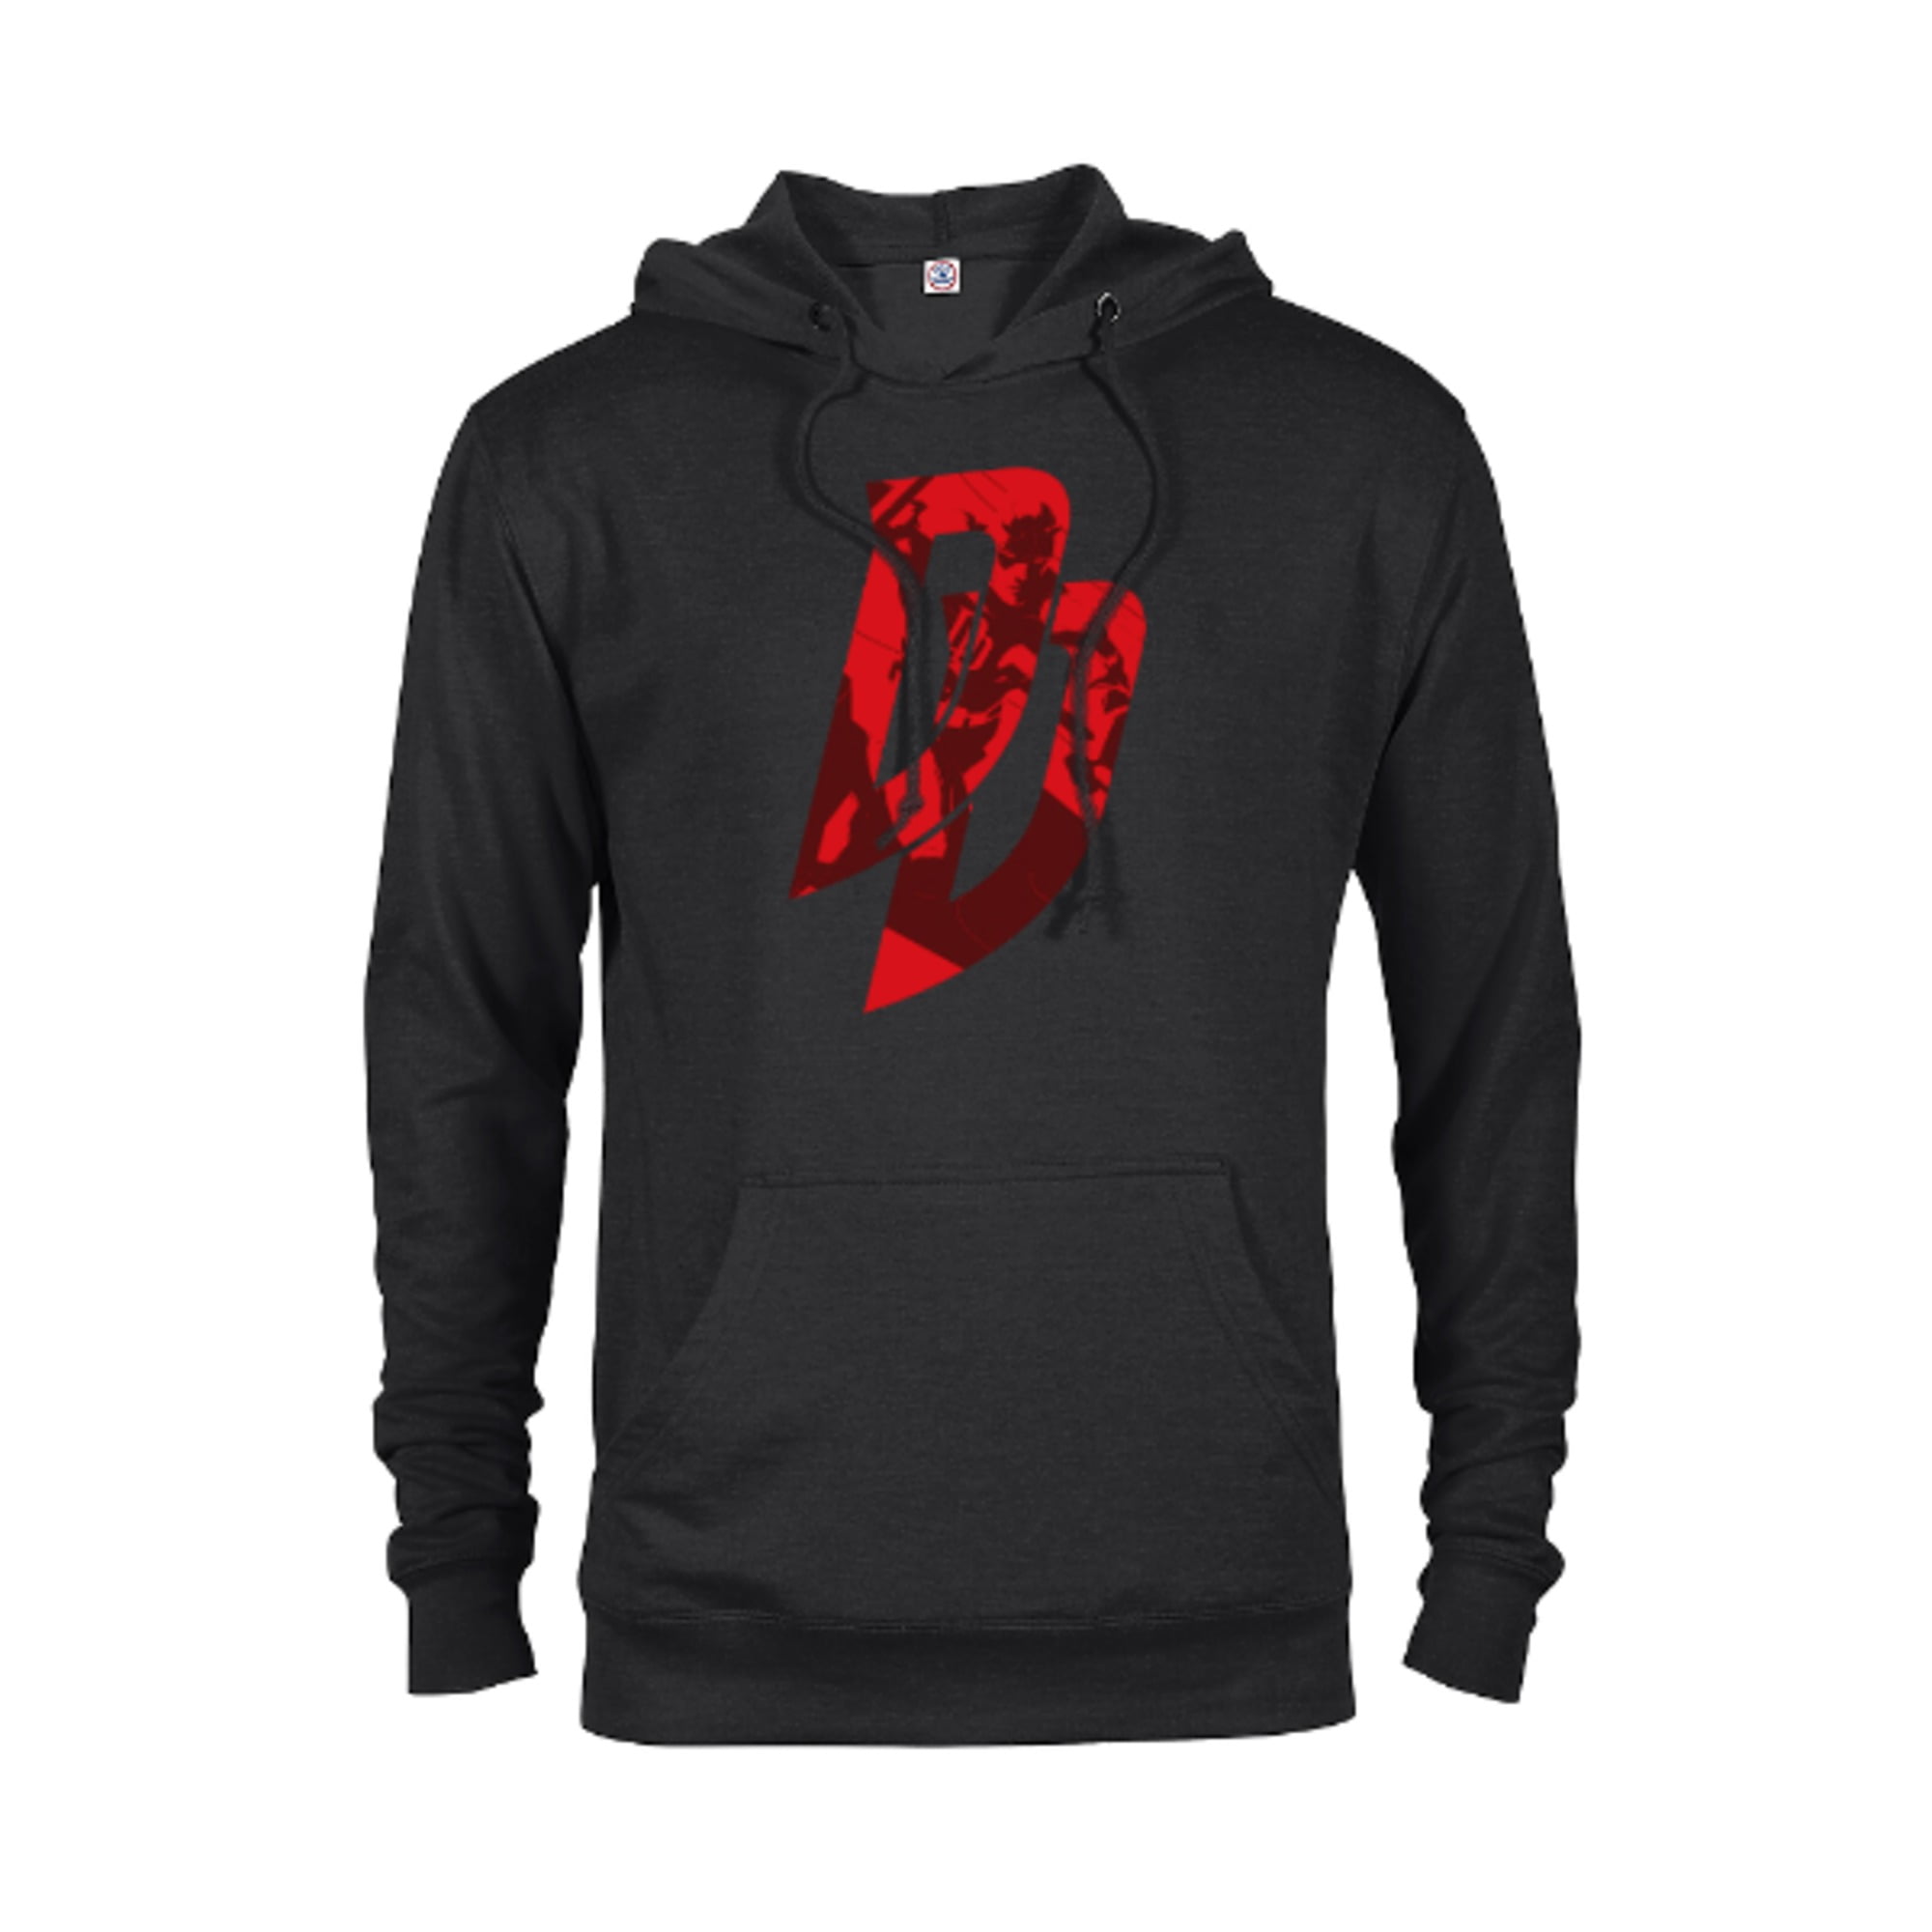 Daredevil Logo The Red Hoodie For Sale - MarketShirt.com